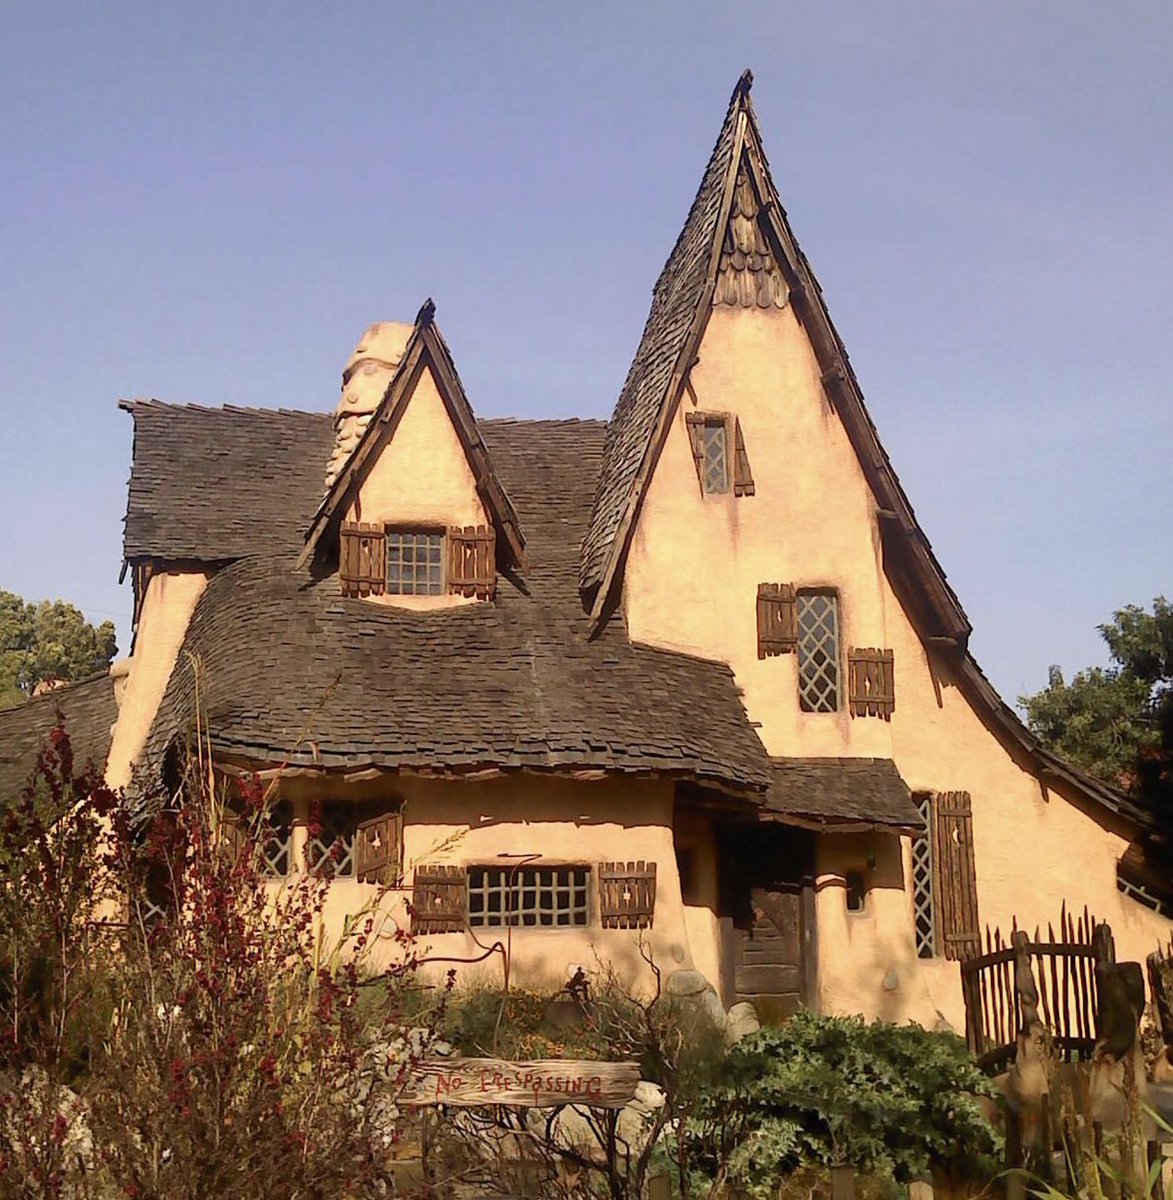 The Willat-Spadena 'witch house', Beverly Hills. Designed in 1921 by Harry Oliver as a film studio's offices; reconstructed at 516 Walden Drive a decade later. The moat leaked and was planted over.